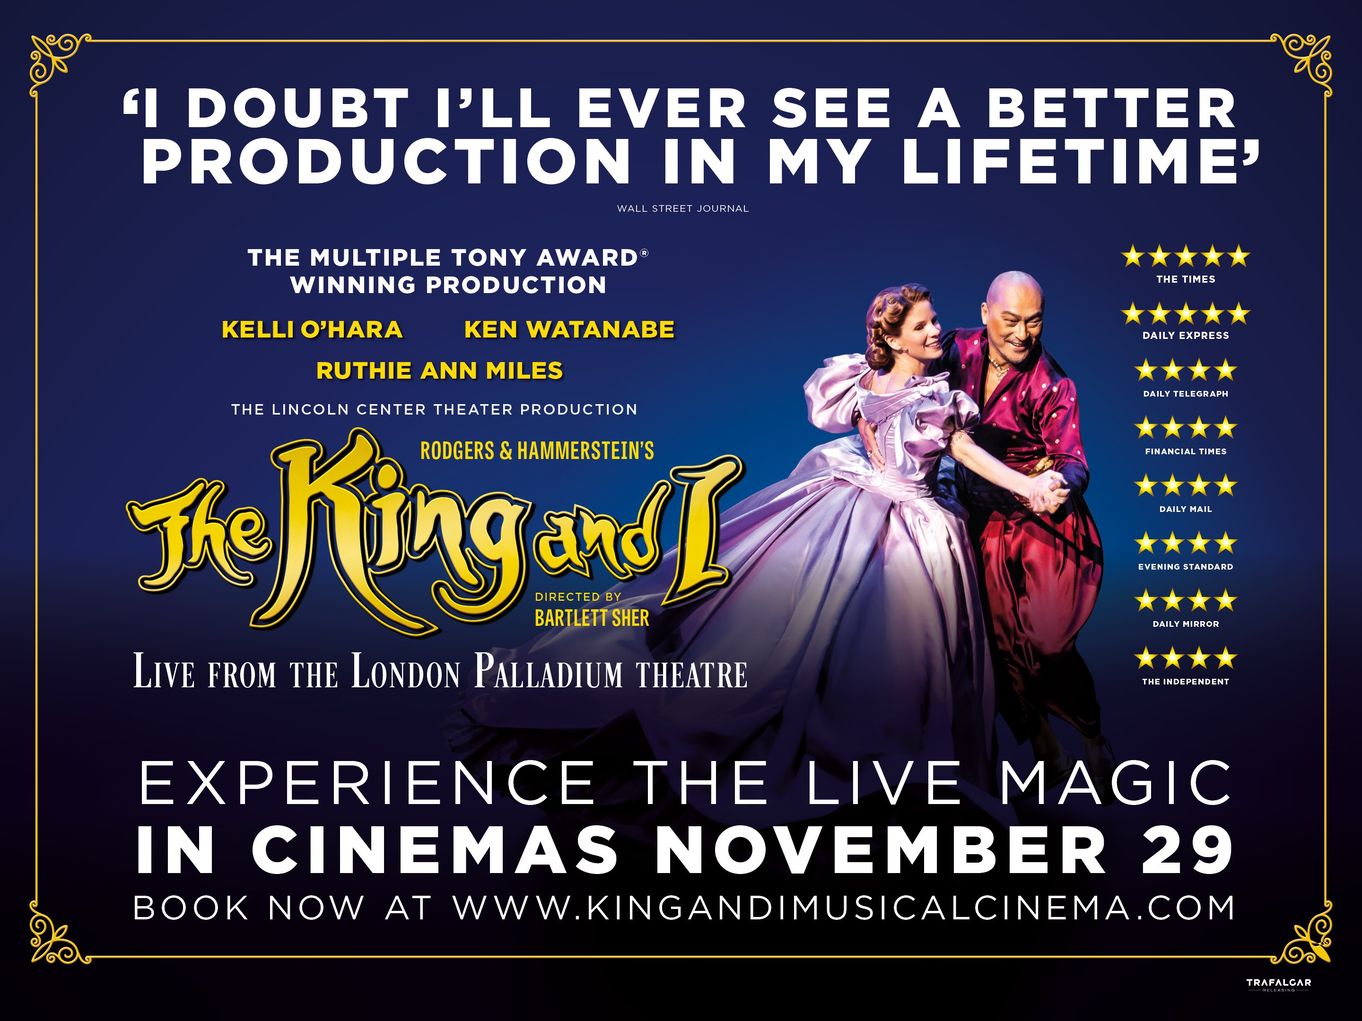 THE KING & I for cinema, from the London Palladium